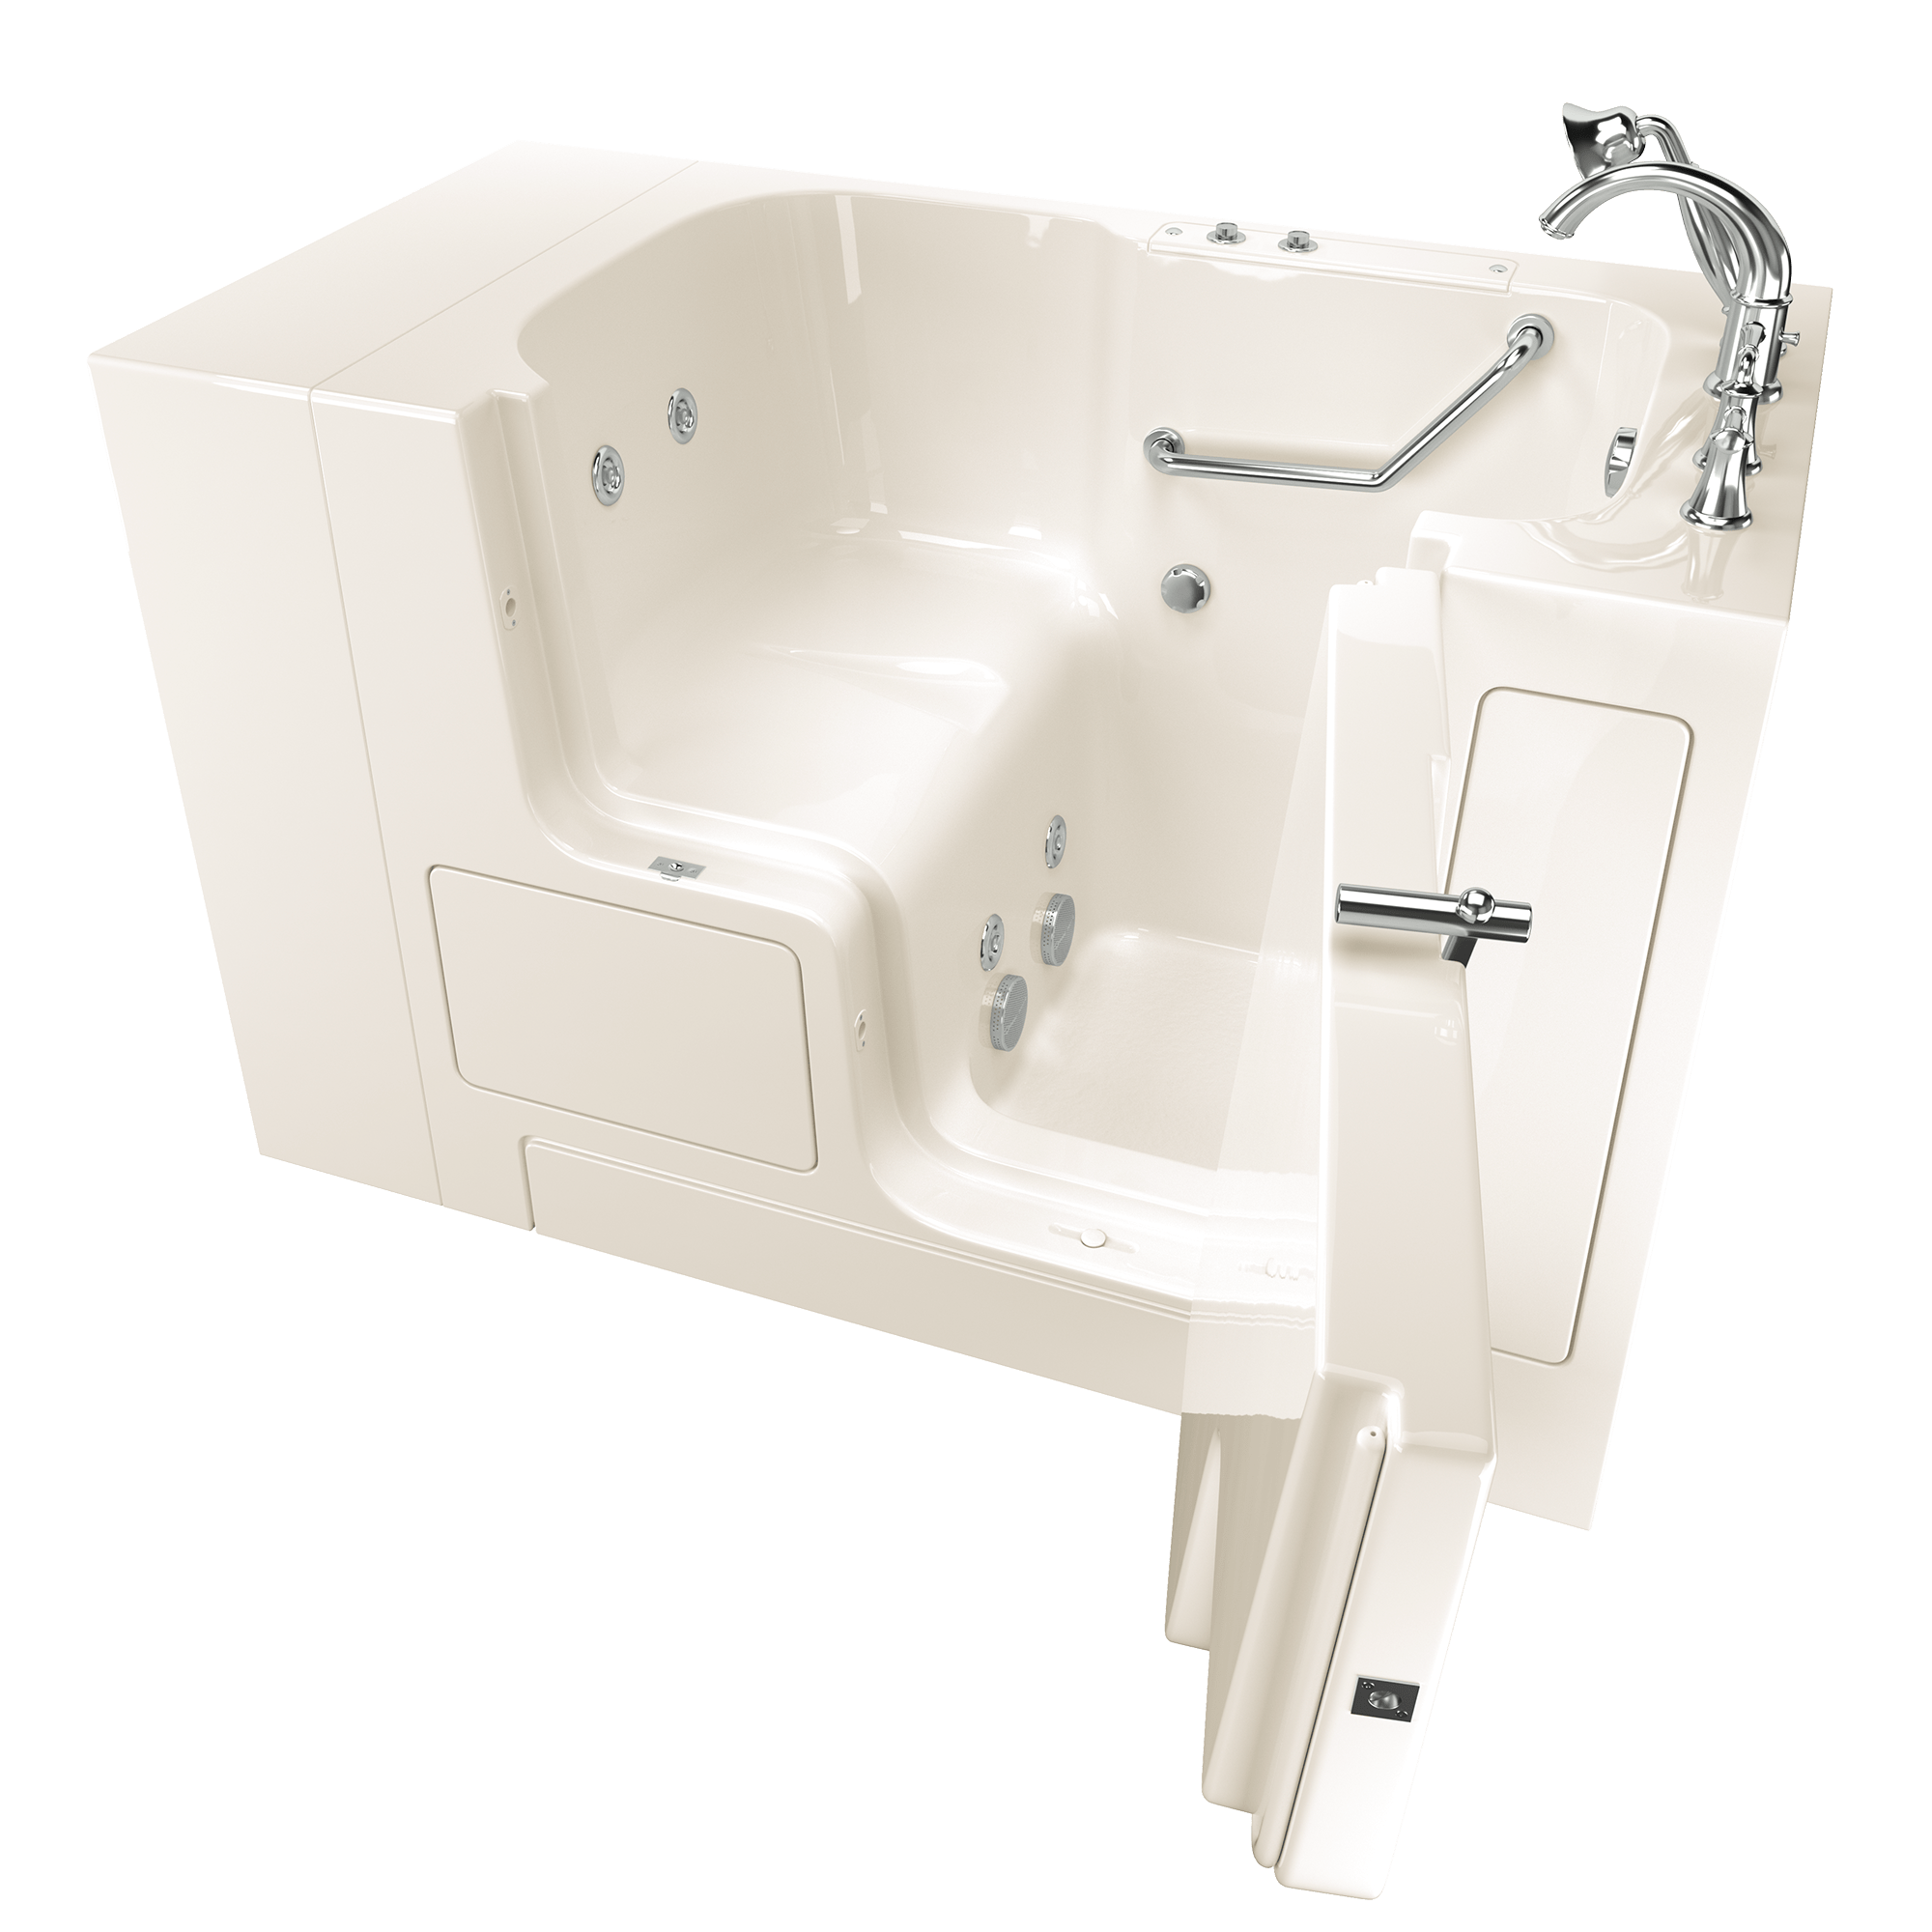 Gelcoat Value Series 32 x 52  Inch Walk in Tub With Whirlpool System   Right Hand Drain With Faucet WIB LINEN